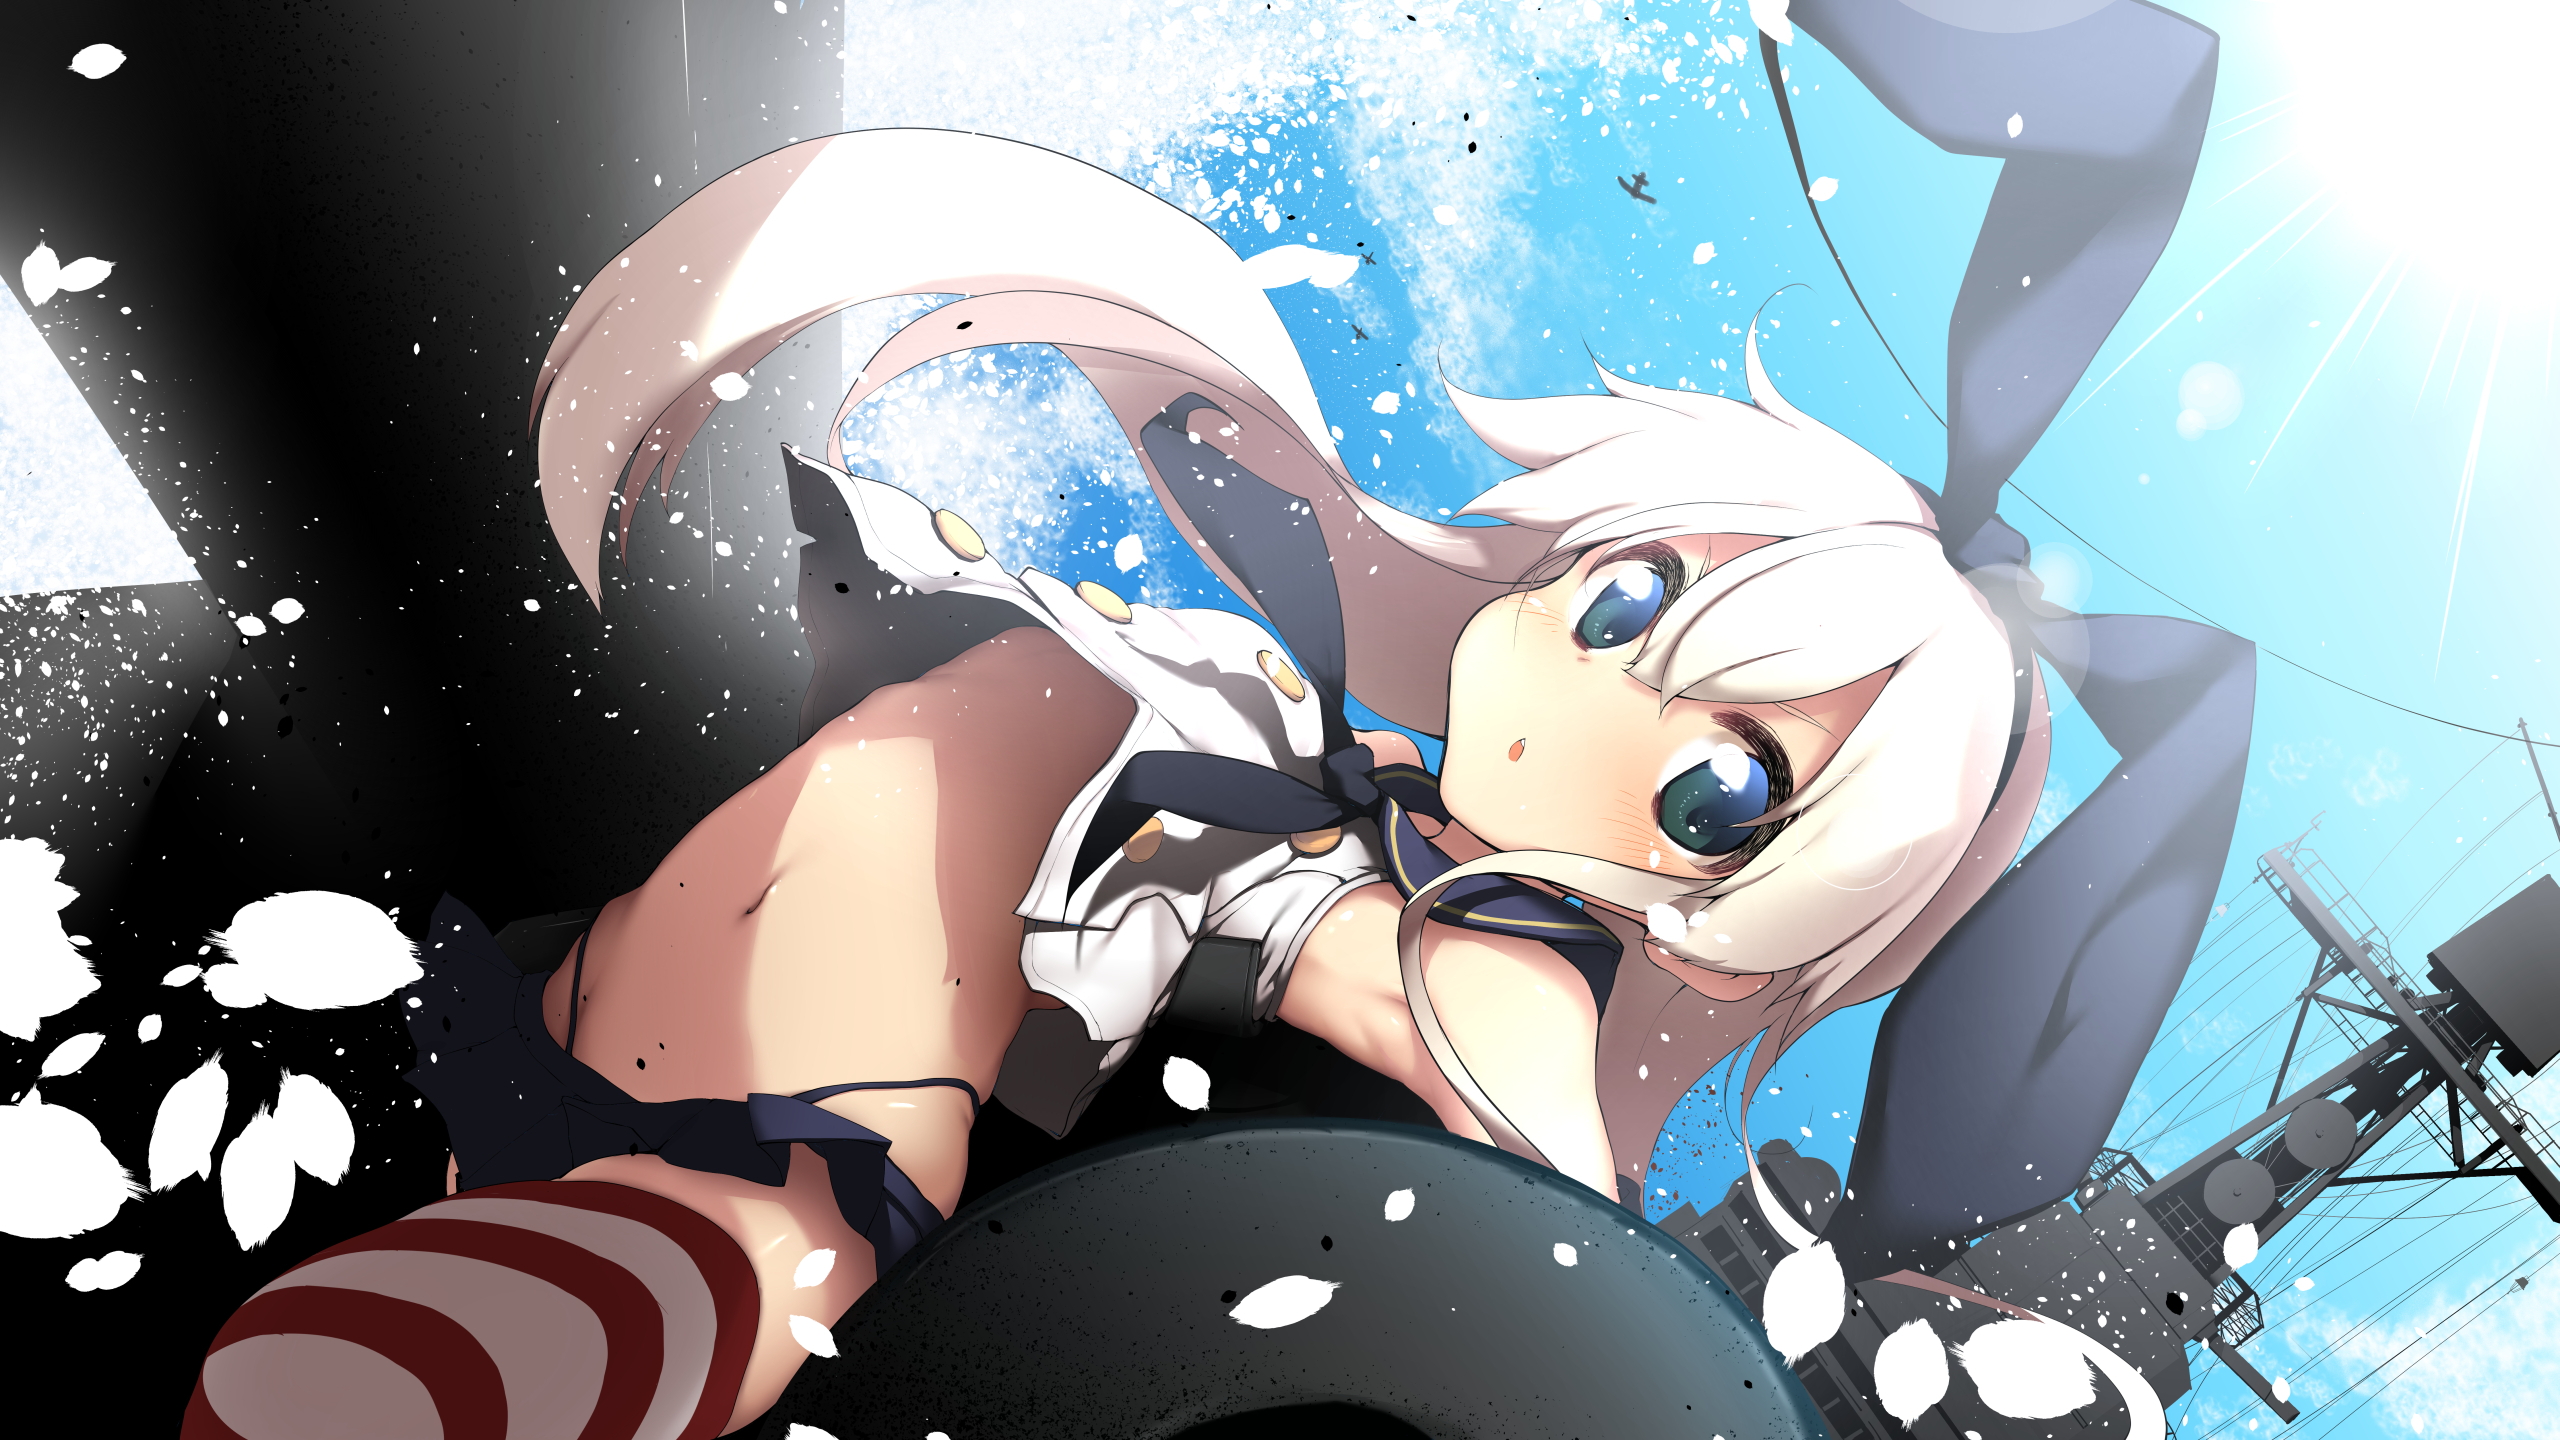 skirt, thigh, highs, wallpaper, white, картинка, аниме, anime, picture, кар...